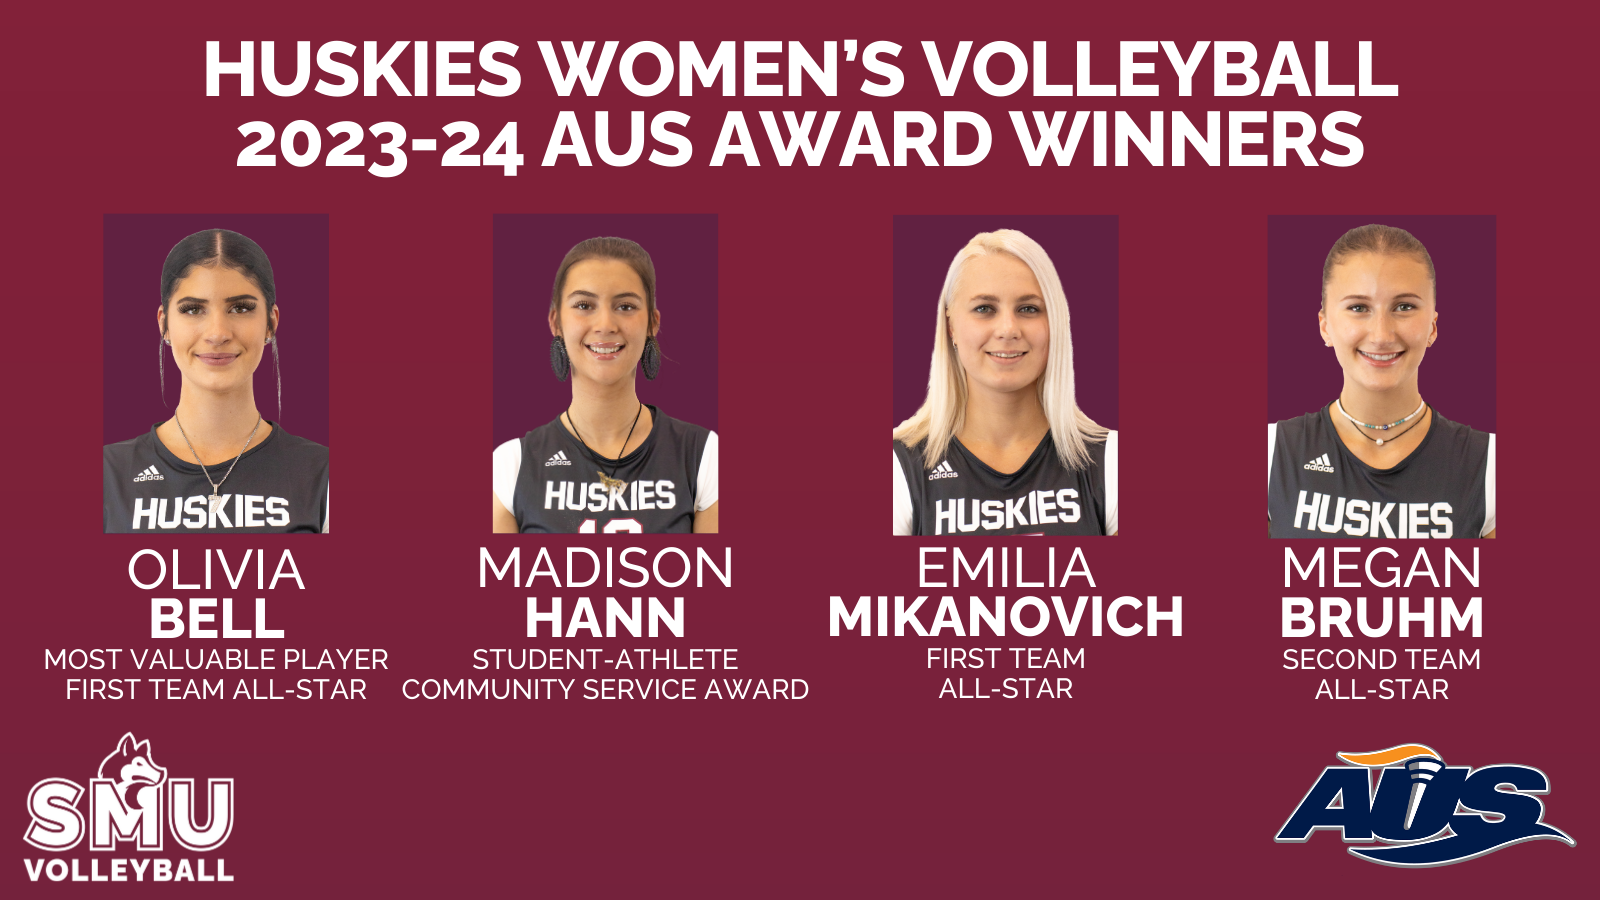 Olivia Bell named AUS Women's Volleyball MVP; Hann, Mikanovich, Bruhm honoured with AUS Awards